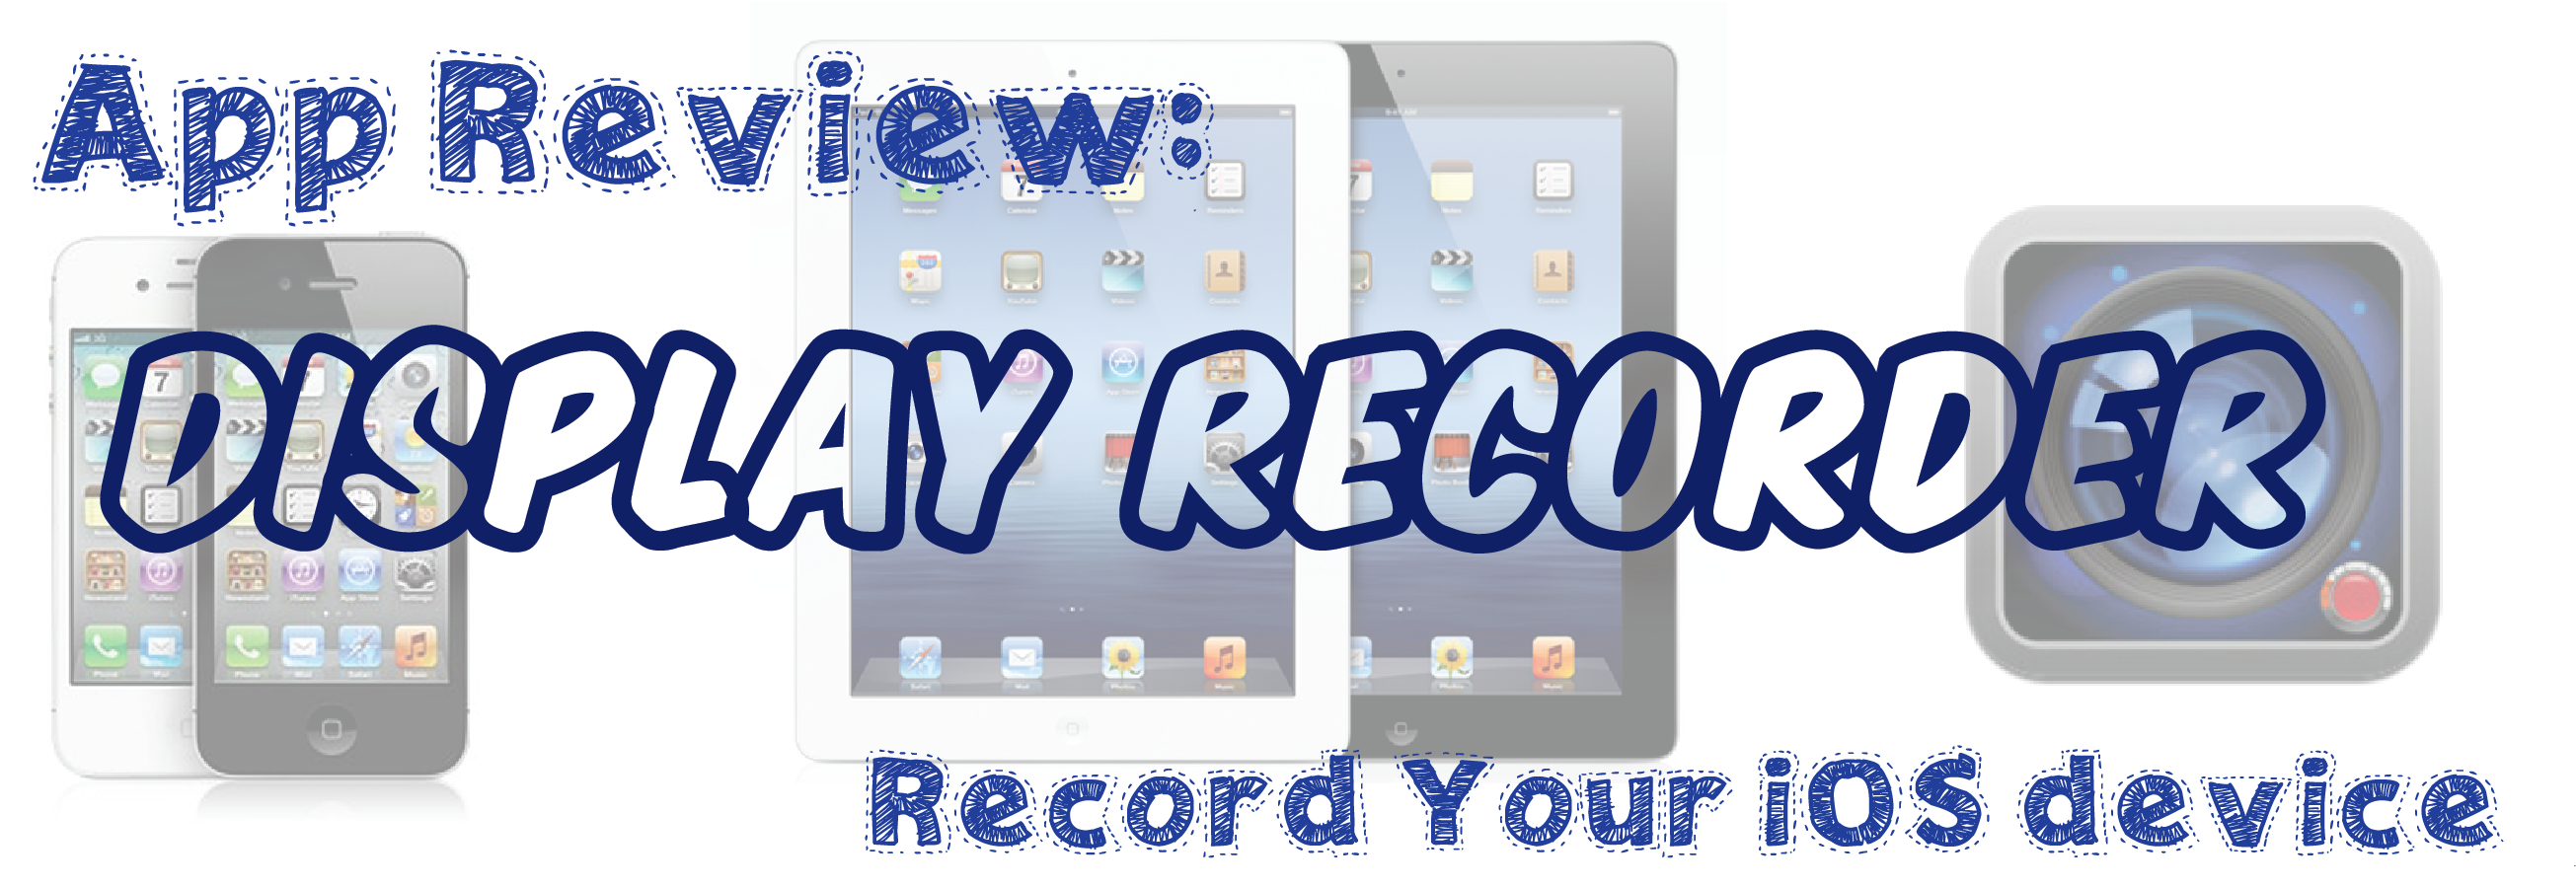 How do you record your screen?